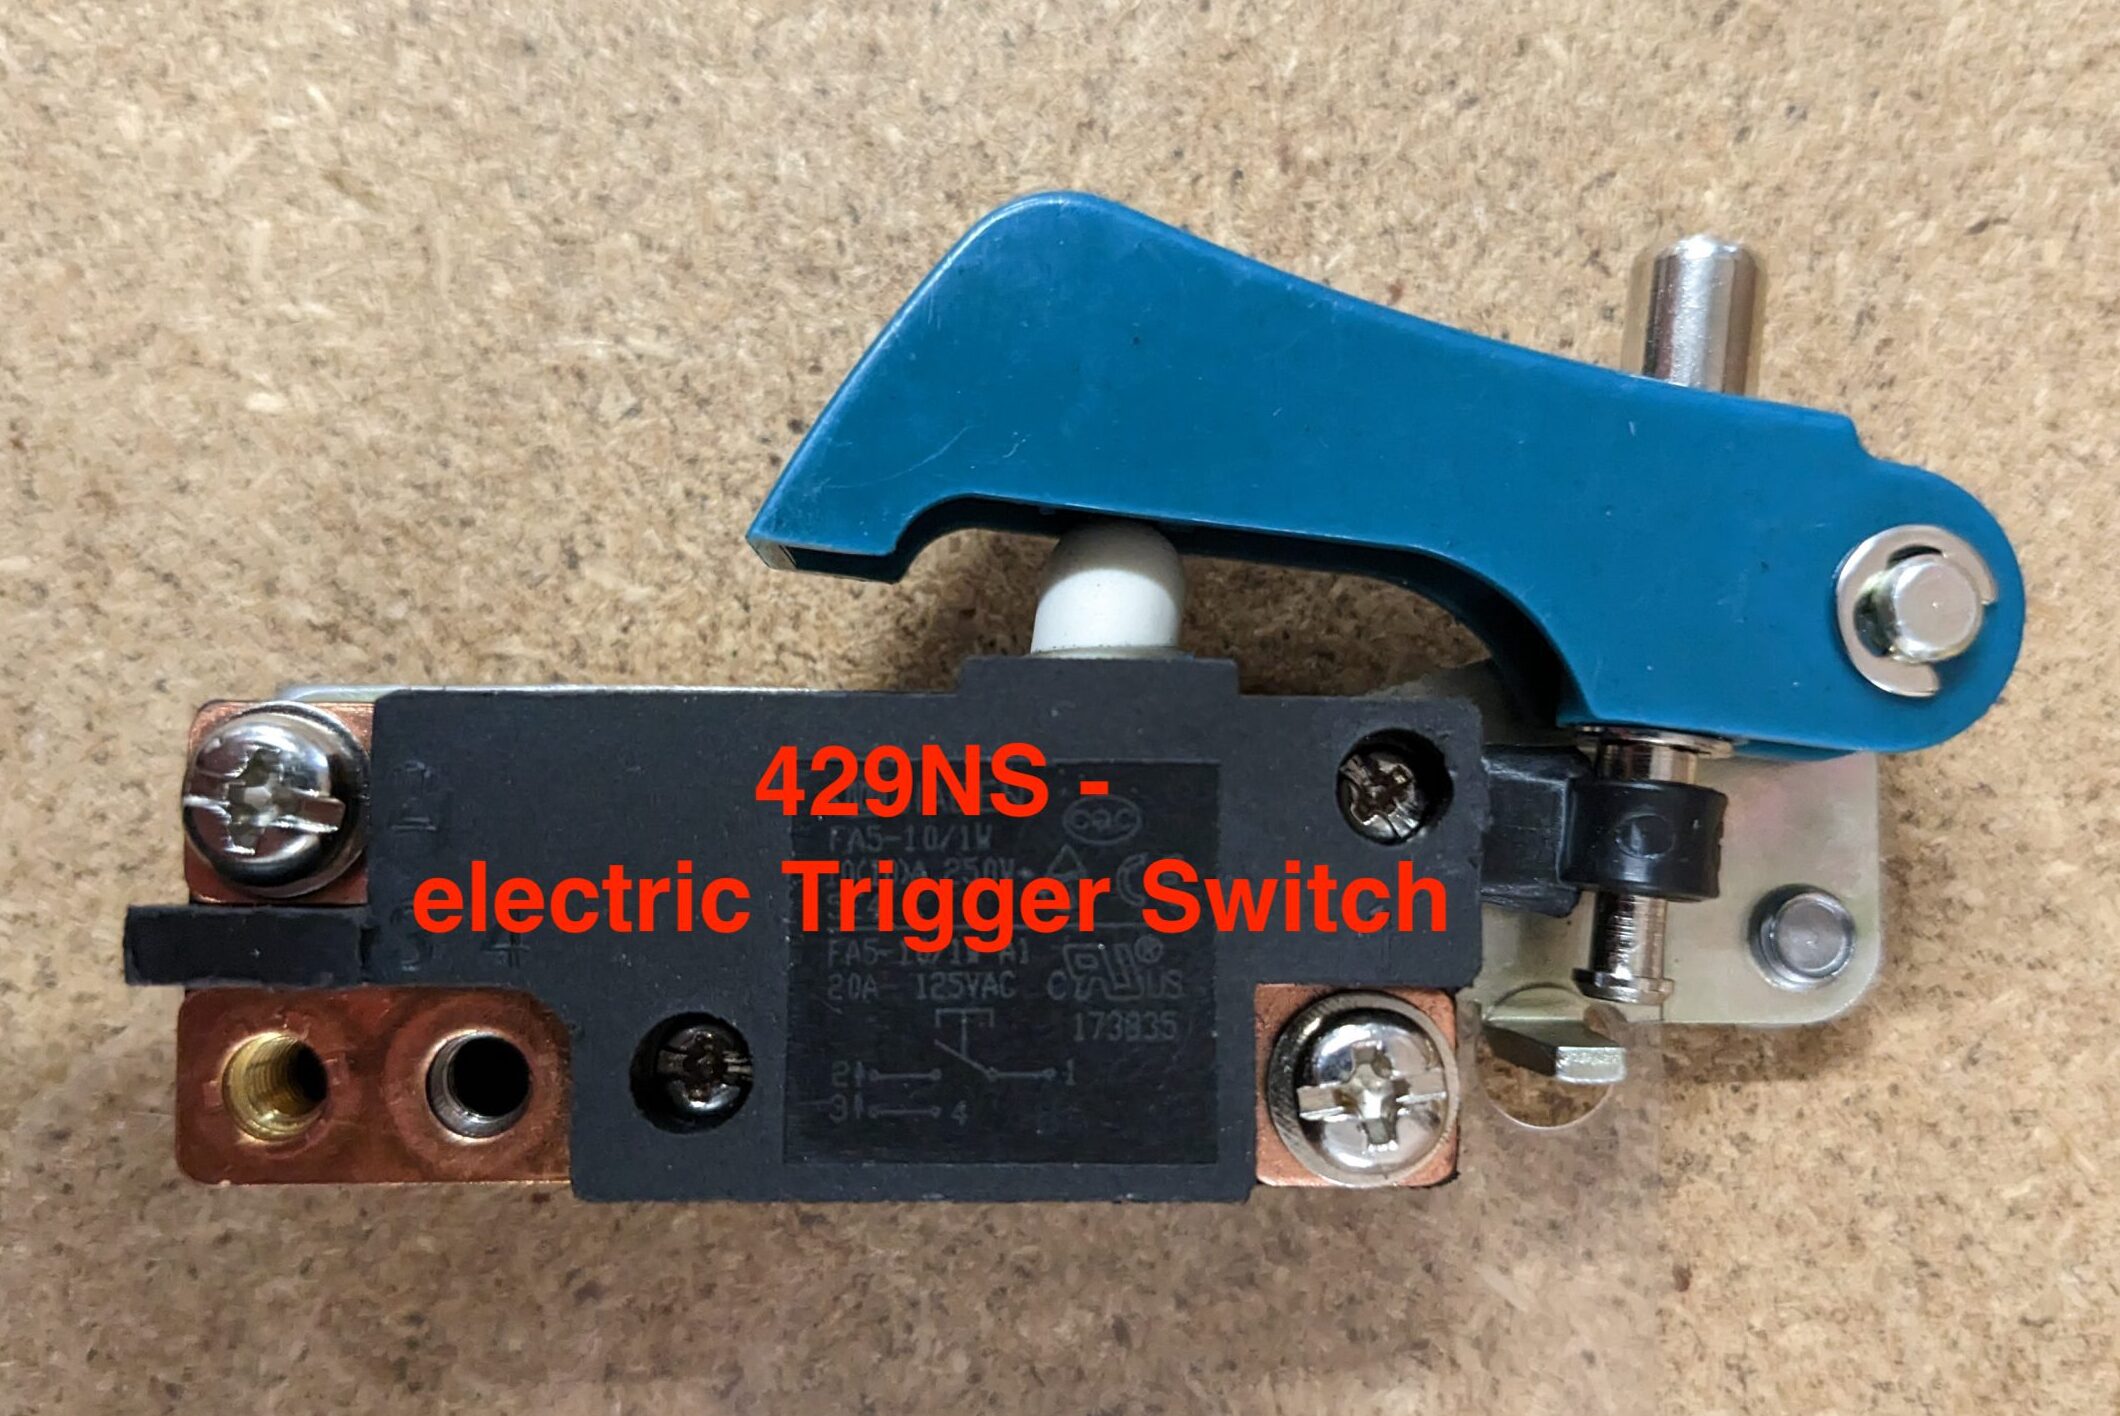 429NS - electric Trigger Switch